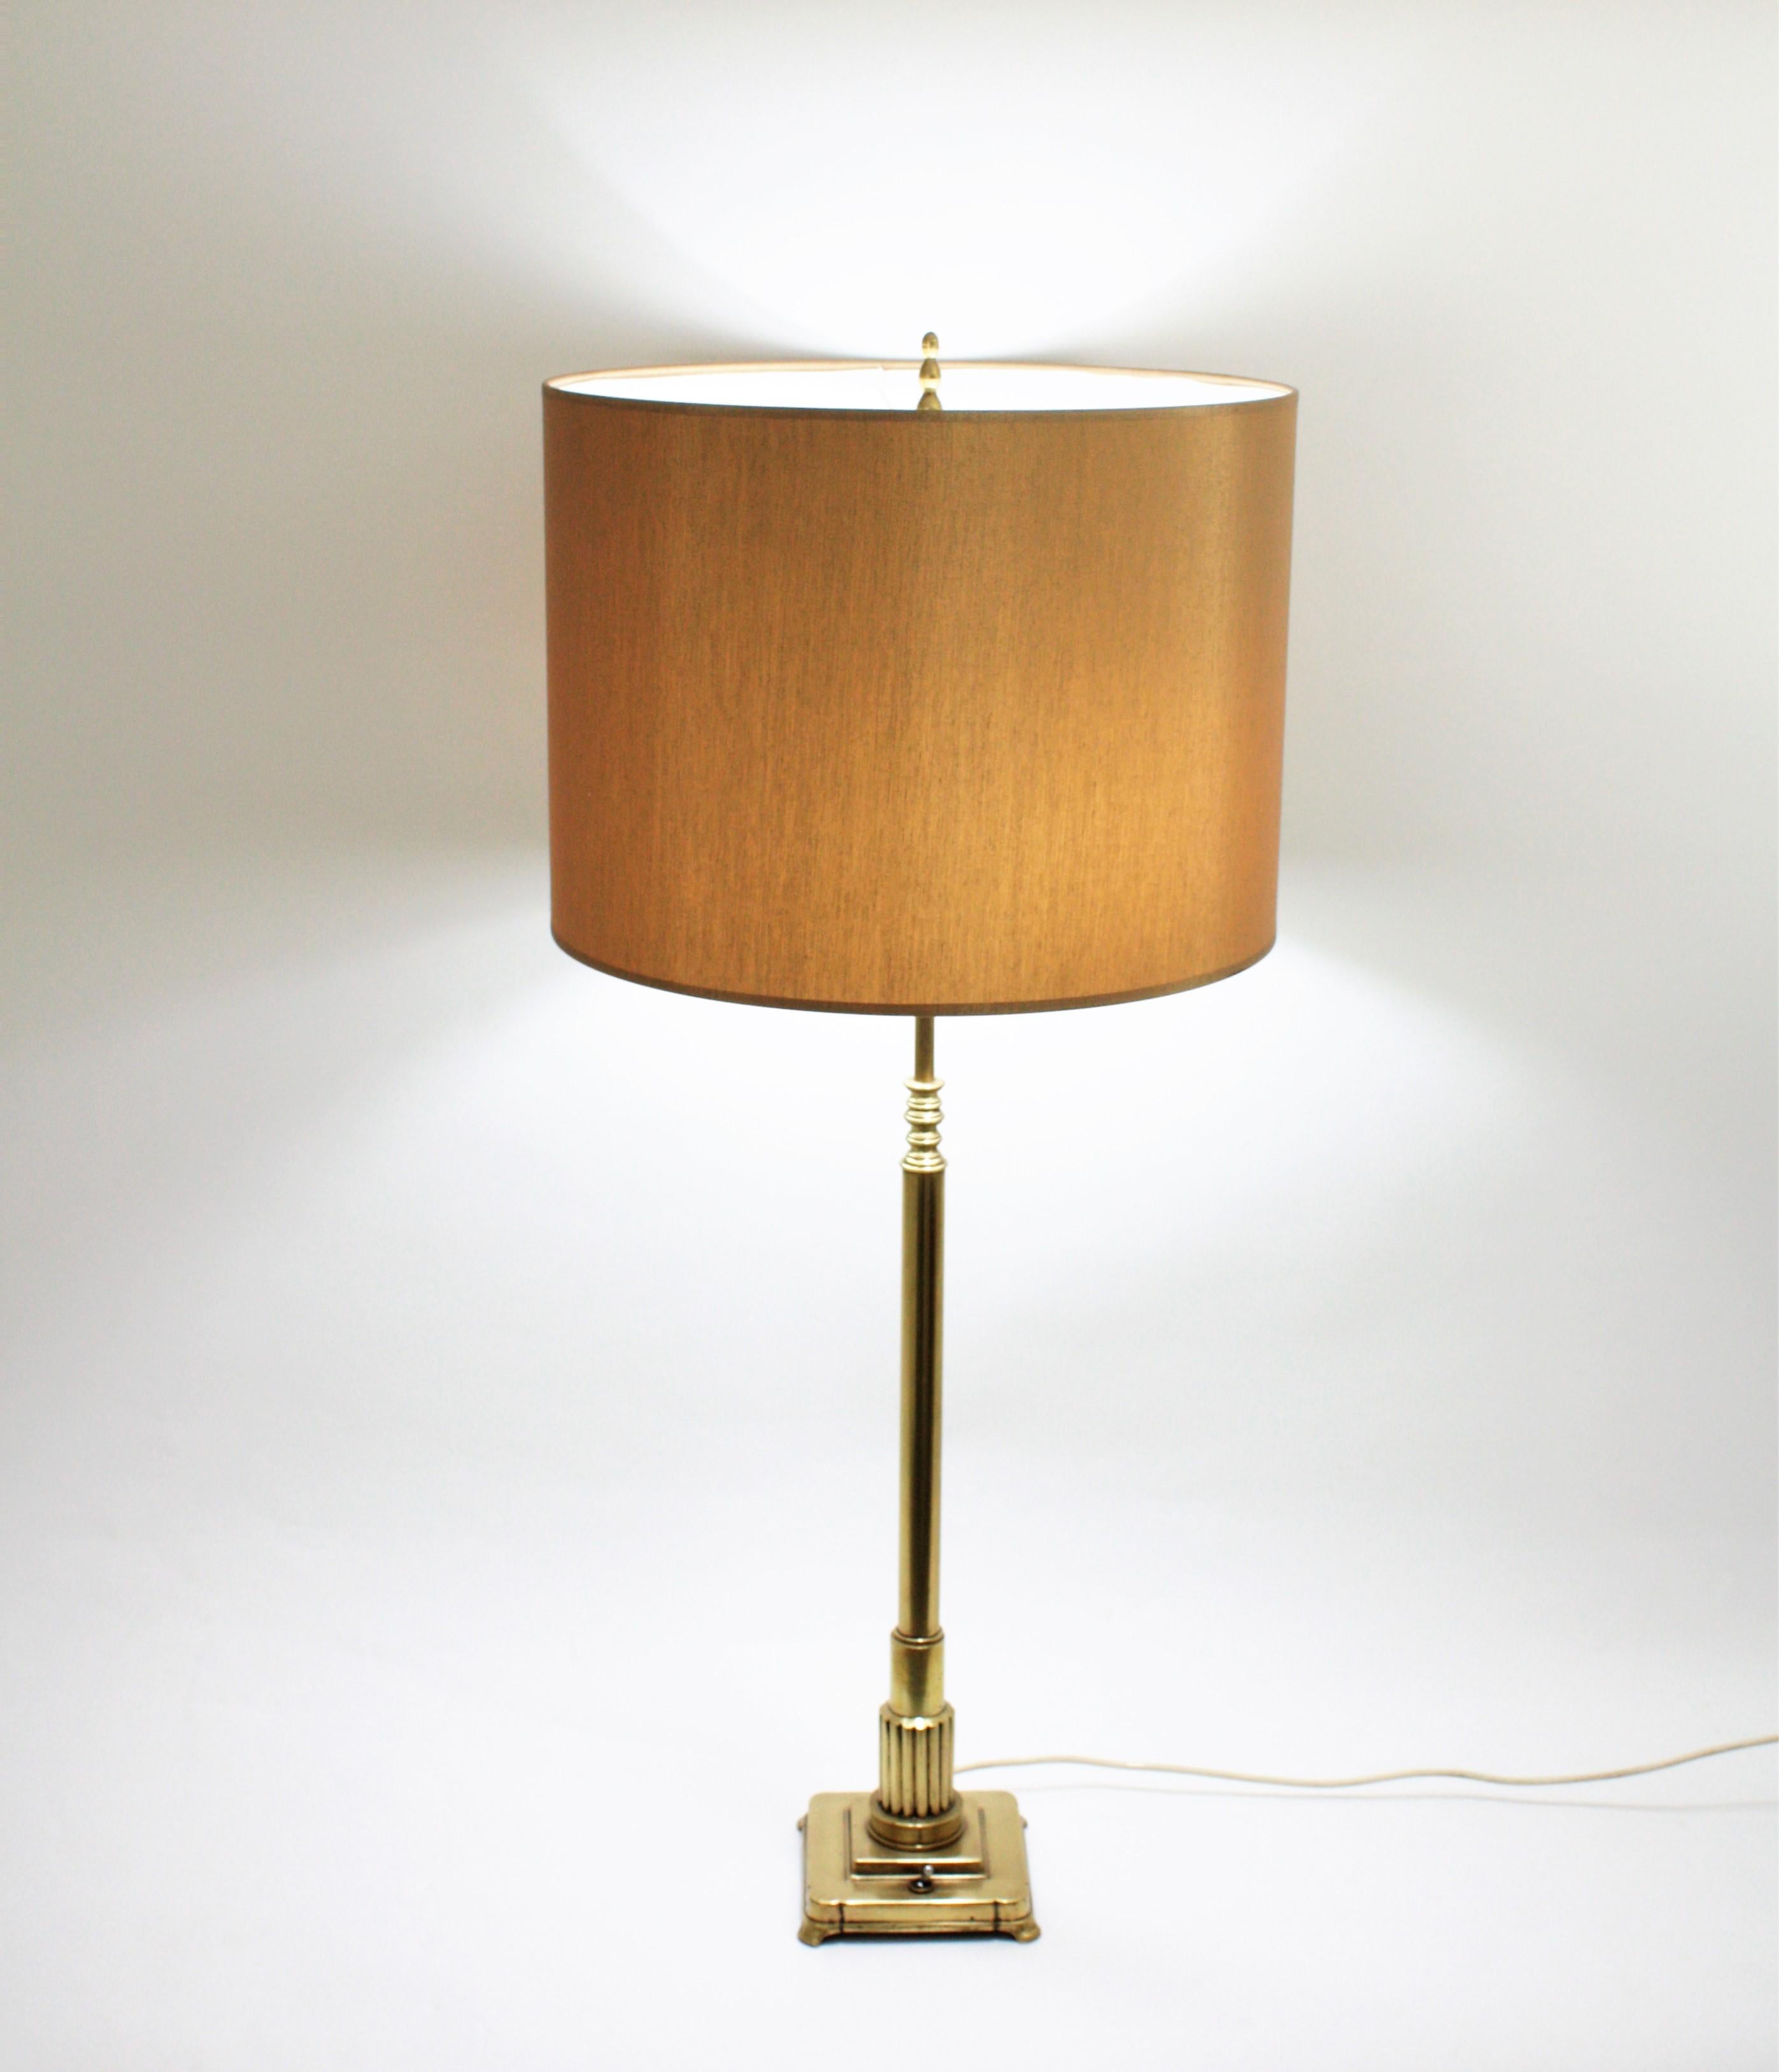 Elegant Art Deco polished brass table lamp, France, 1930s.
This two-light table lamp has a column shaped body standing on a squared footed base with on/off switch.
The brass has been polished and varnished.
Shade not included.
Measures without